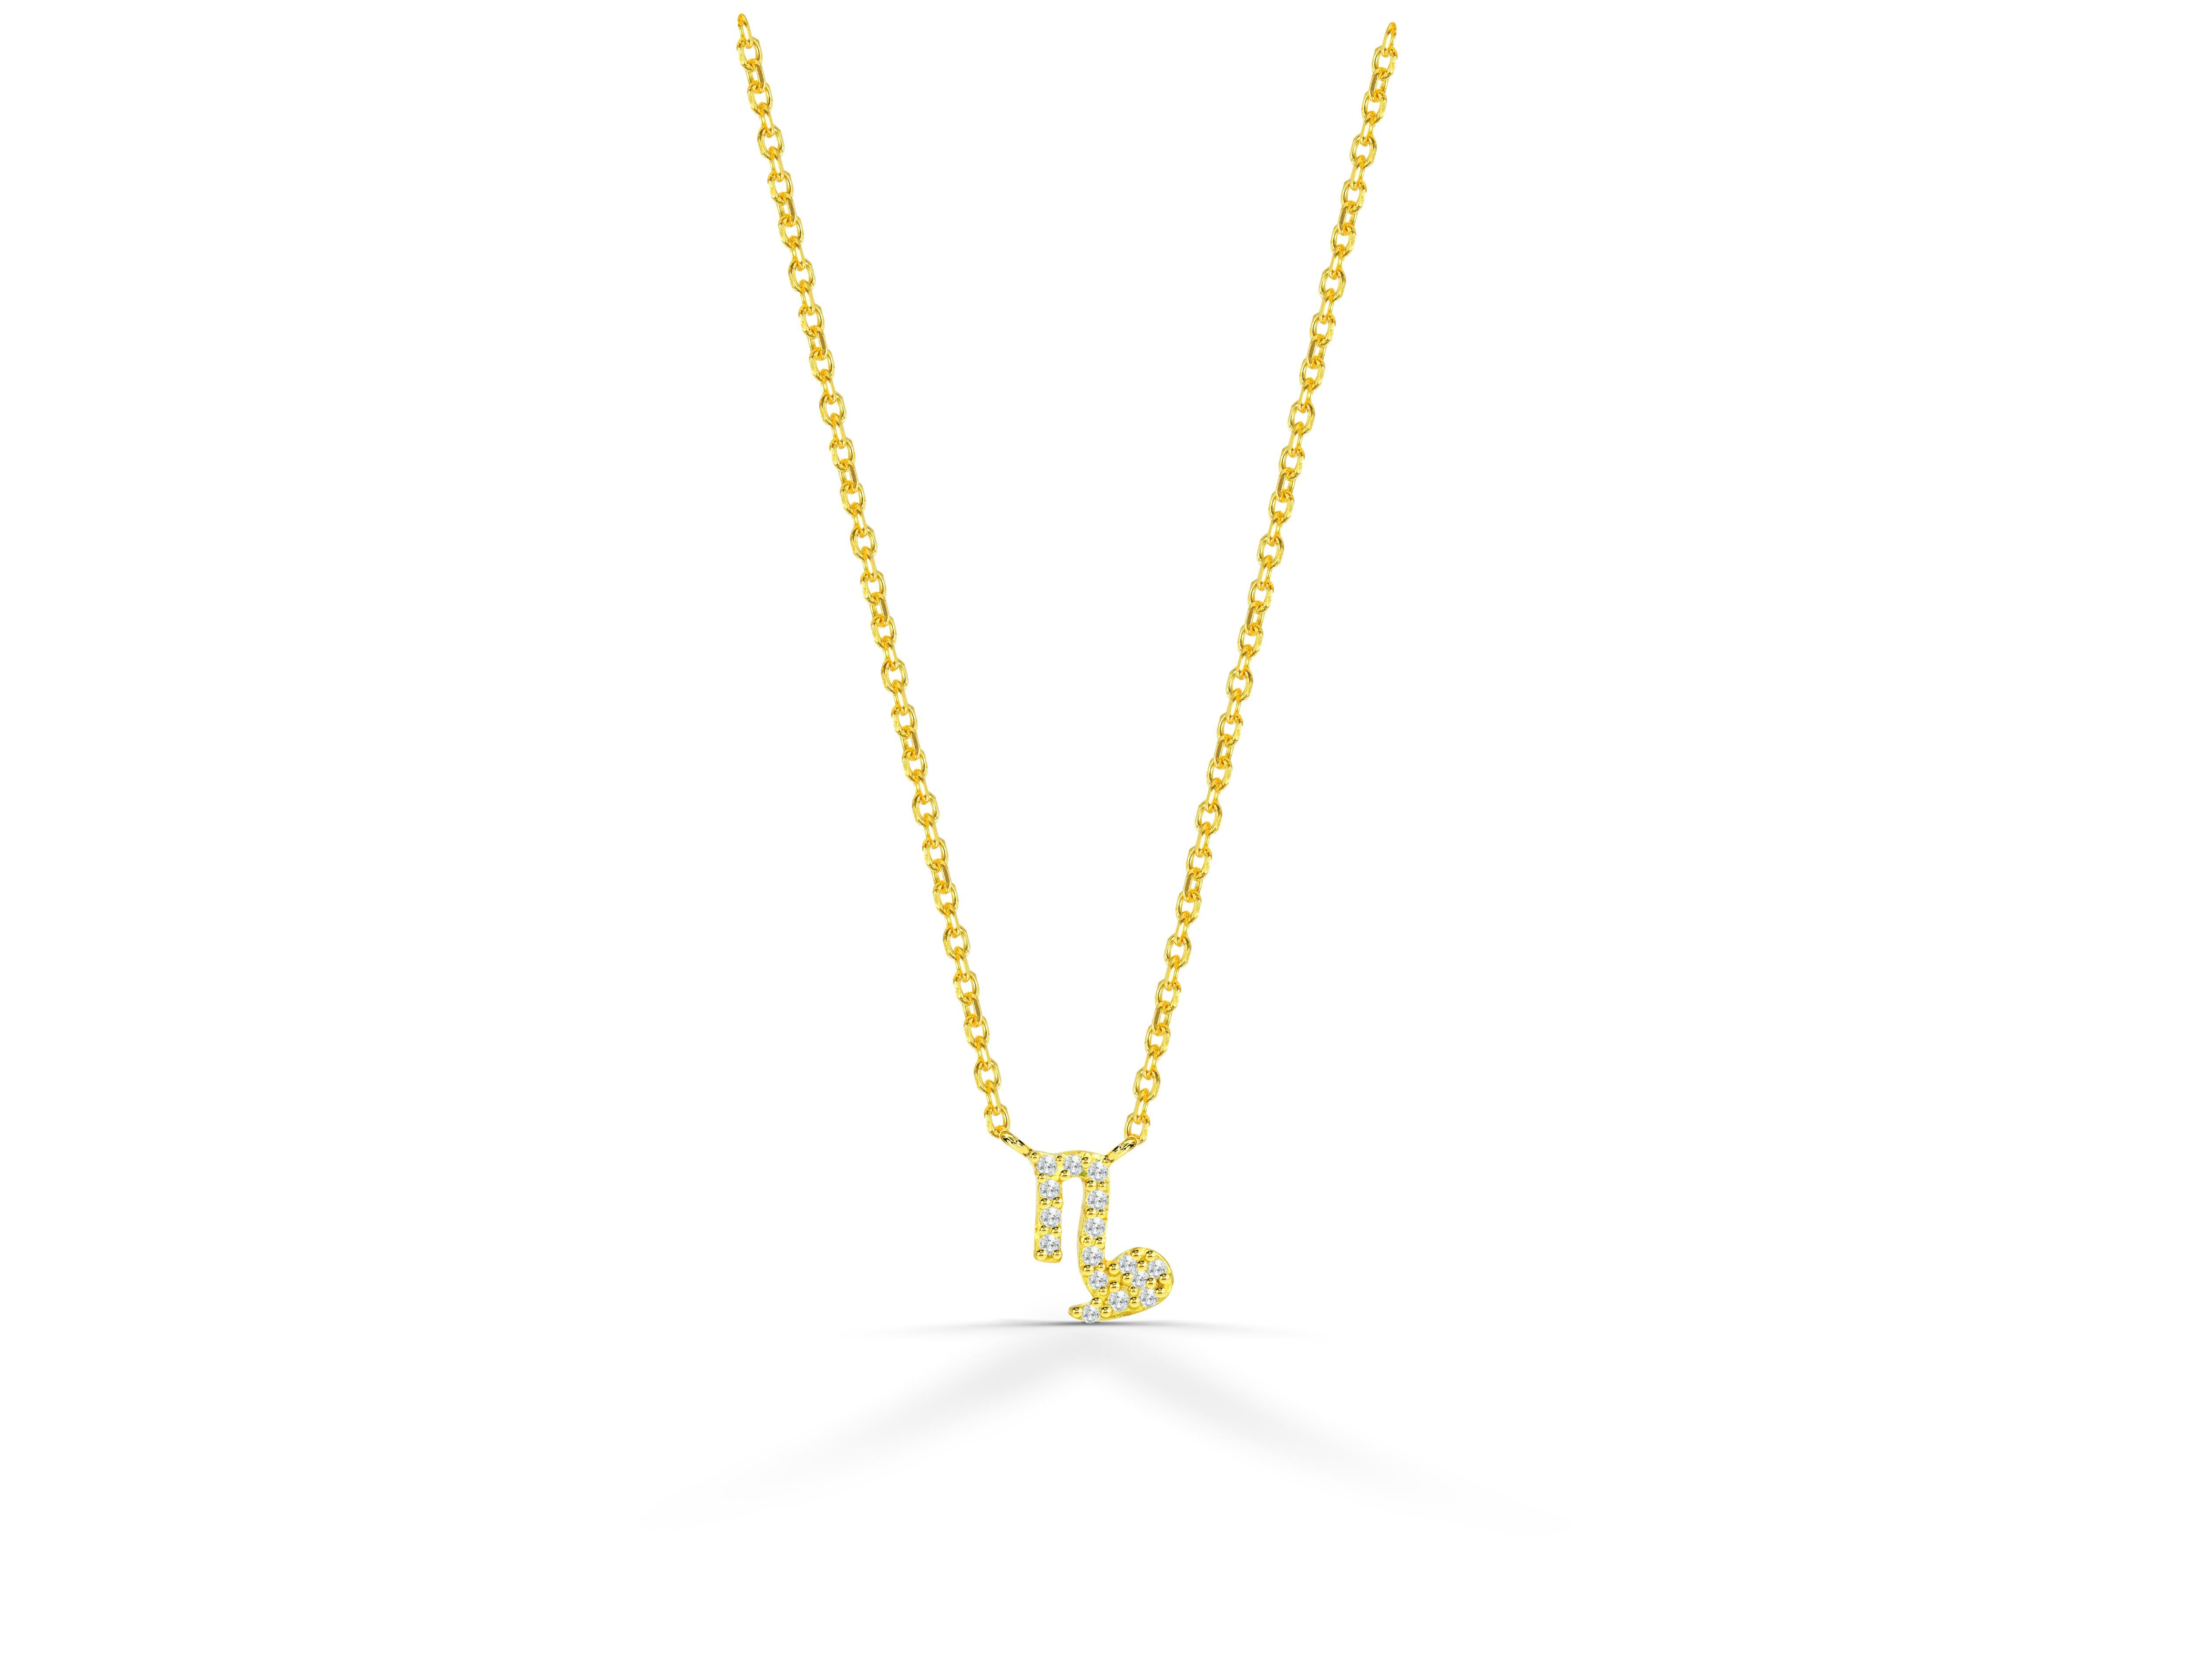 Beautiful and Sparkly Diamond Capricorn Necklace is made of 18k solid gold available in three colors of gold, White Gold / Rose Gold / Yellow Gold.

Natural genuine round cut diamond each diamond is hand selected by me to ensure quality and set by a